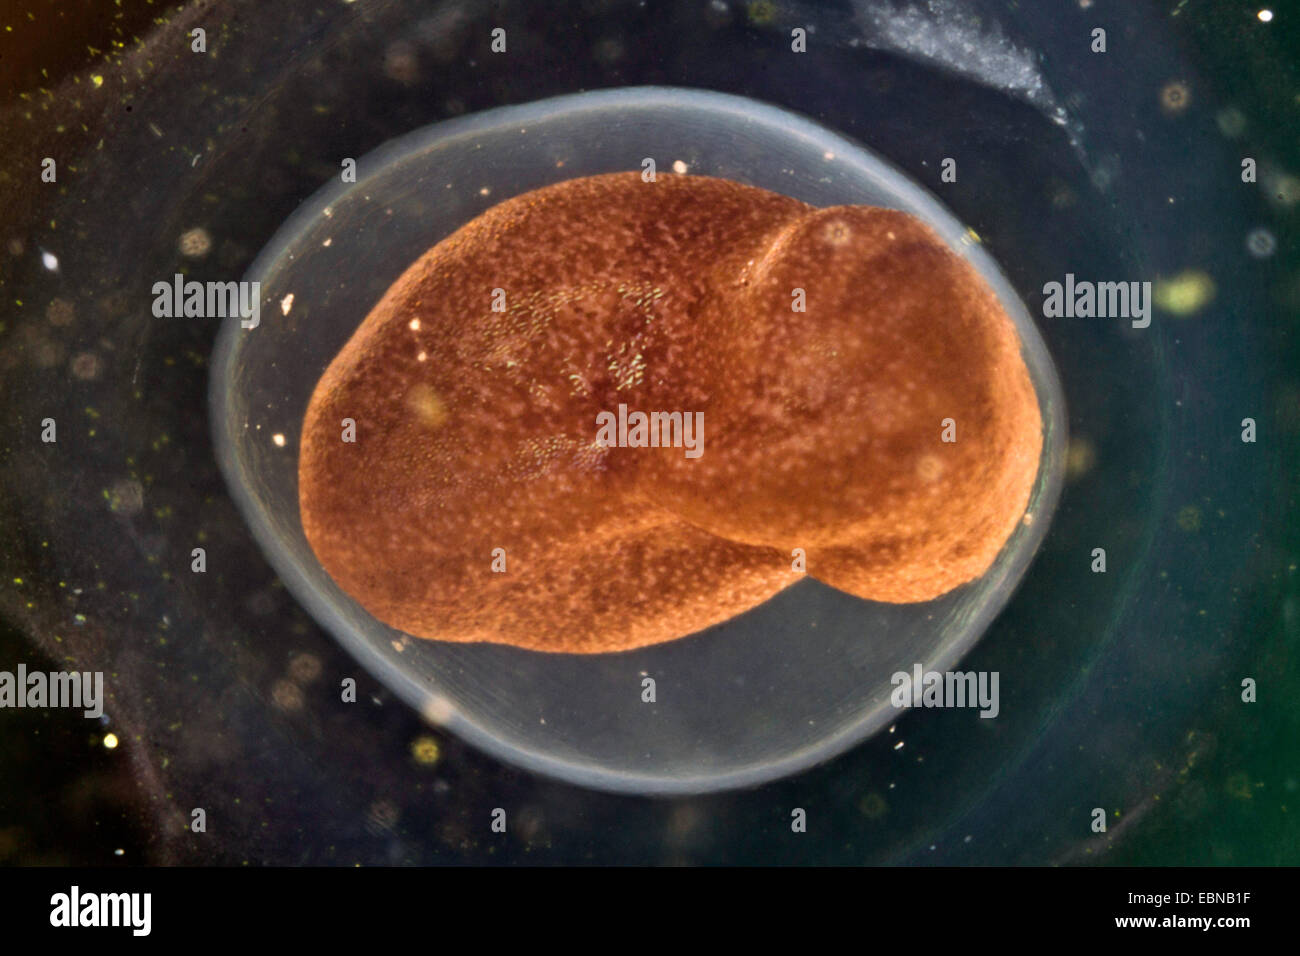 moor frog (Rana arvalis), egg with embryonic development Stock Photo